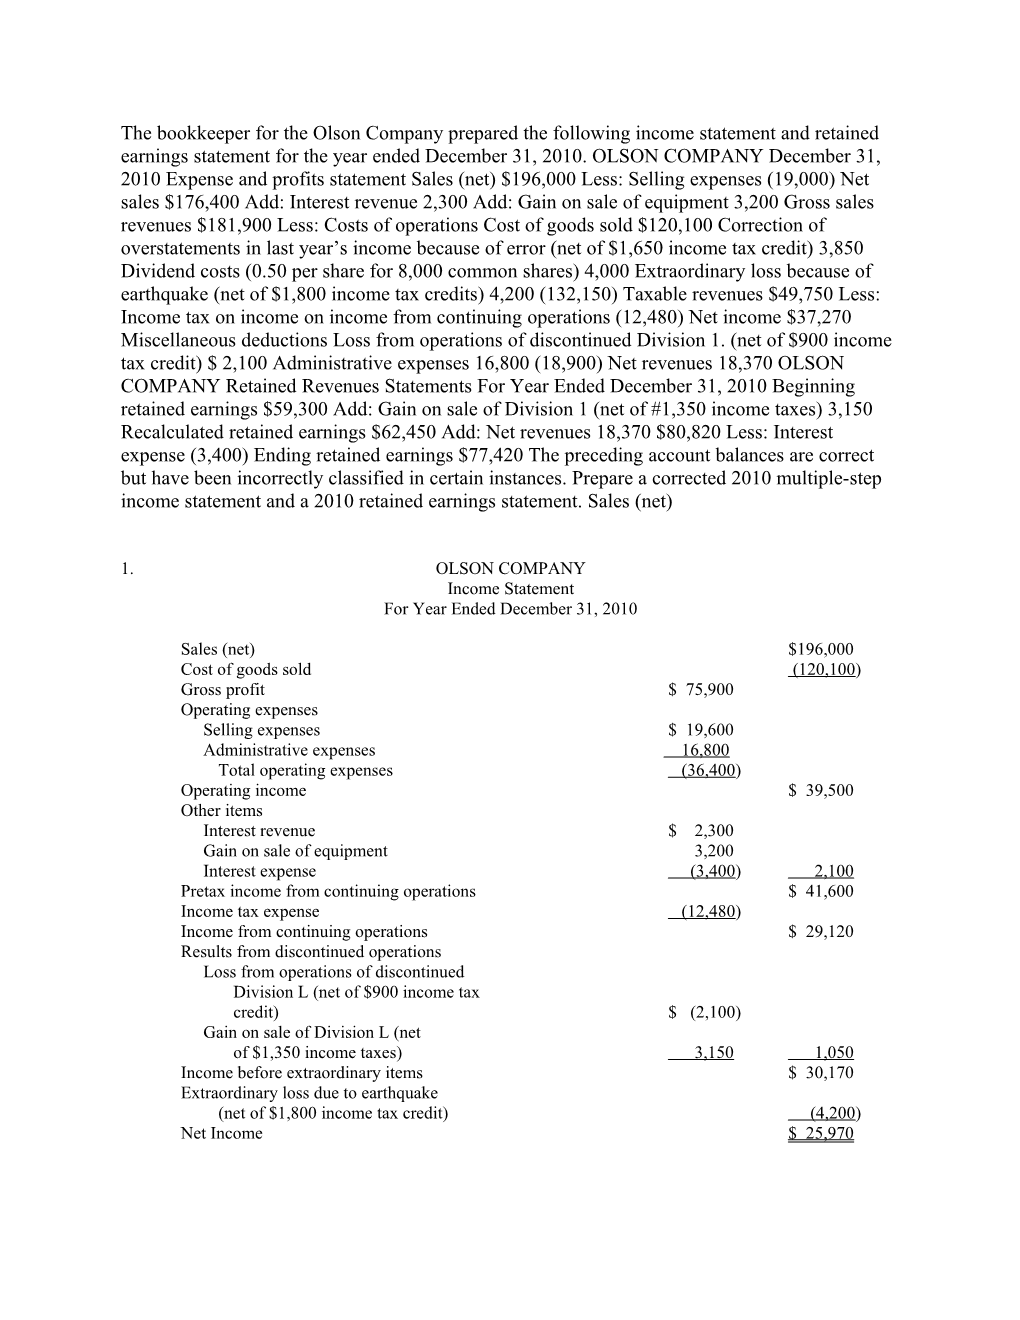 The Bookkeeper for the Olson Company Prepared the Following Income Statement and Retained